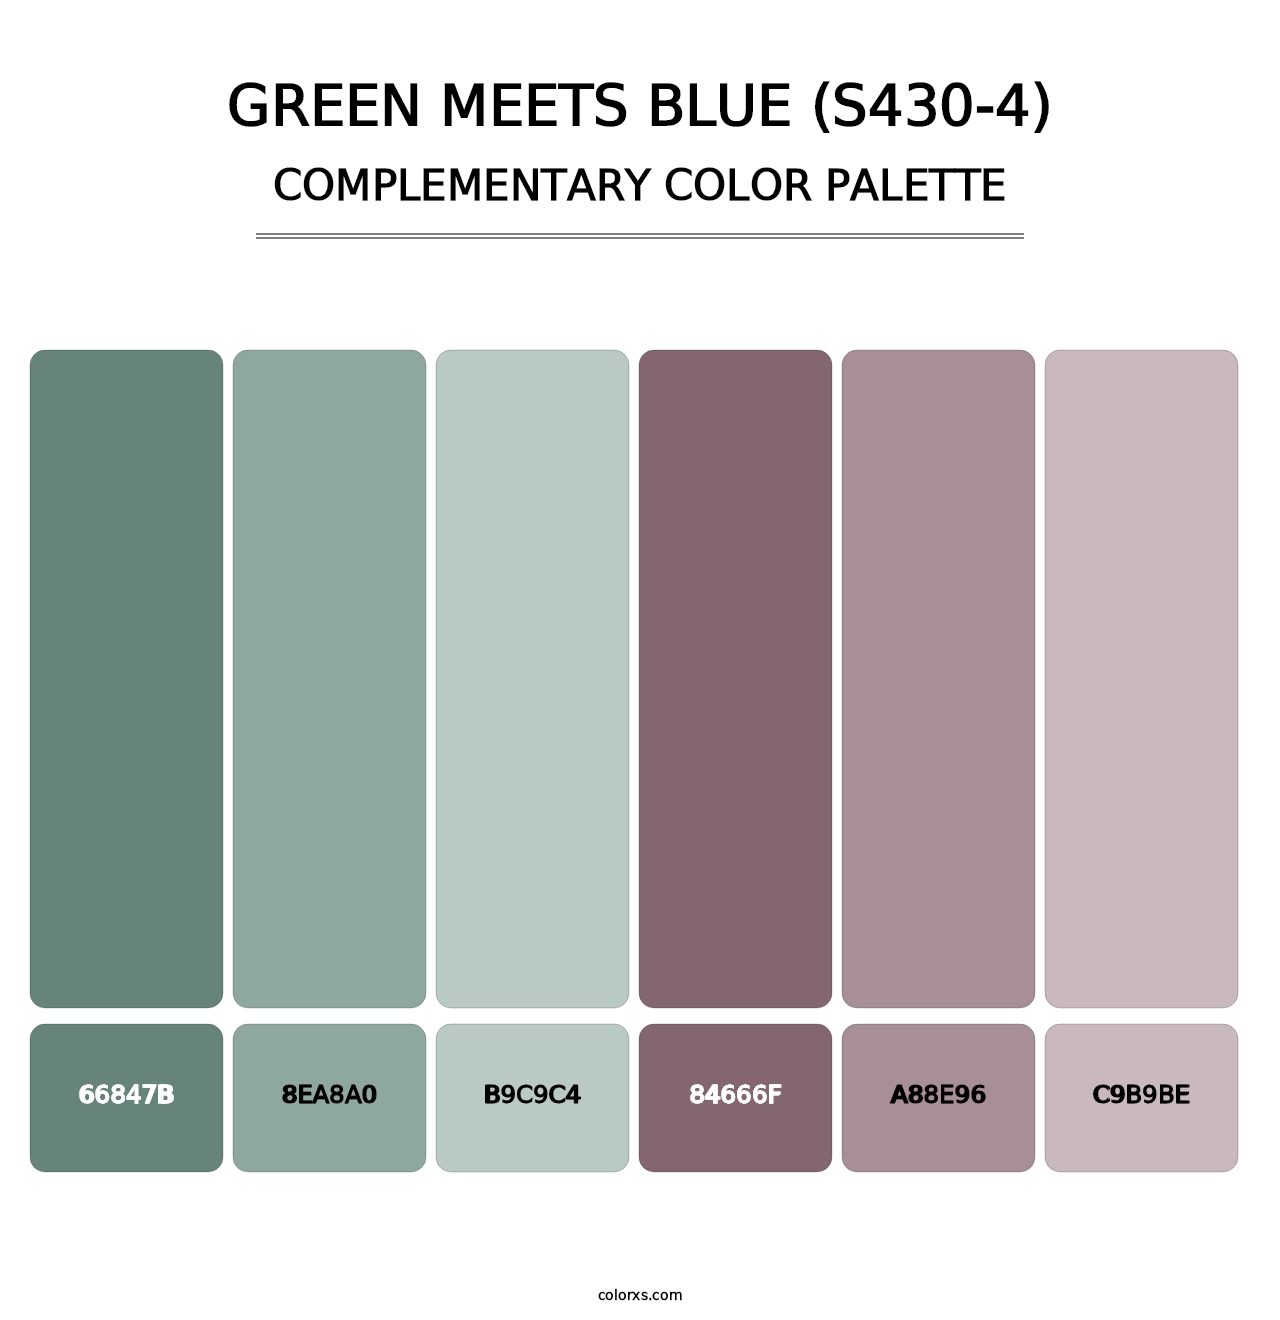 Green Meets Blue (S430-4) - Complementary Color Palette